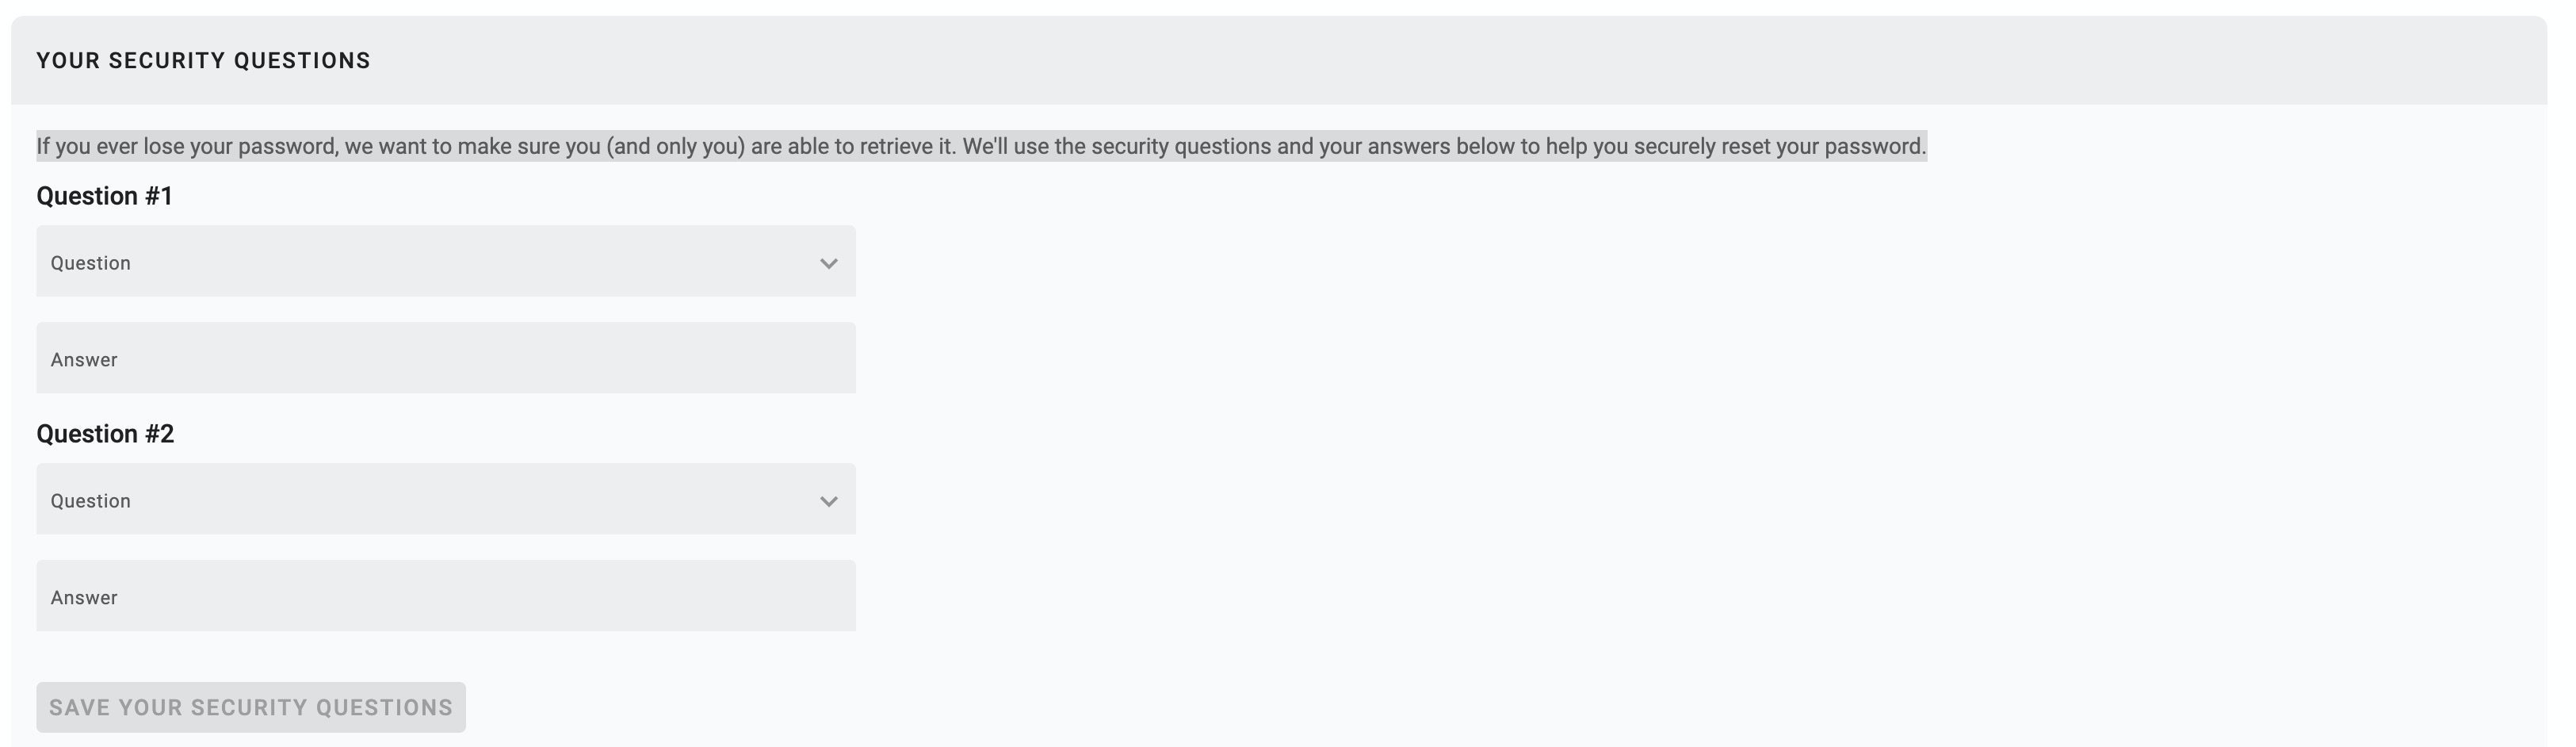 My_Account_Your_Security_Questions.jpg